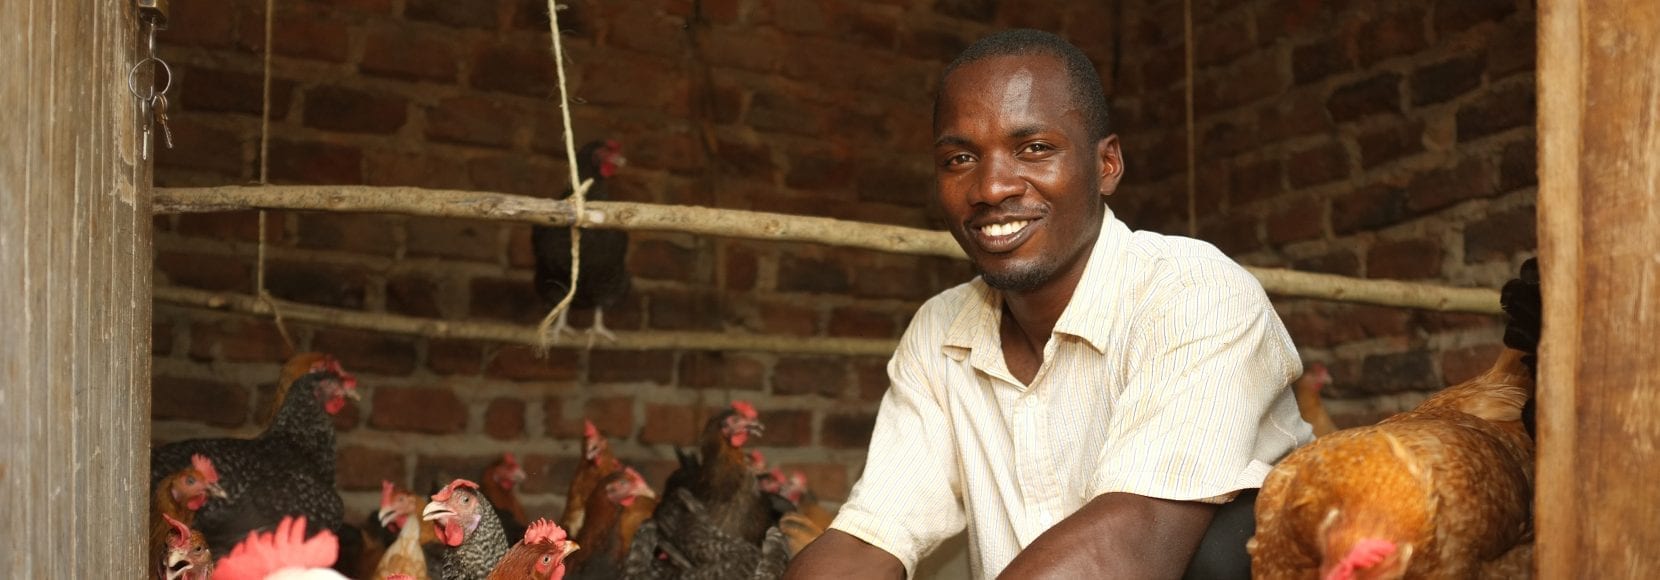 Man smiling while working with chickens